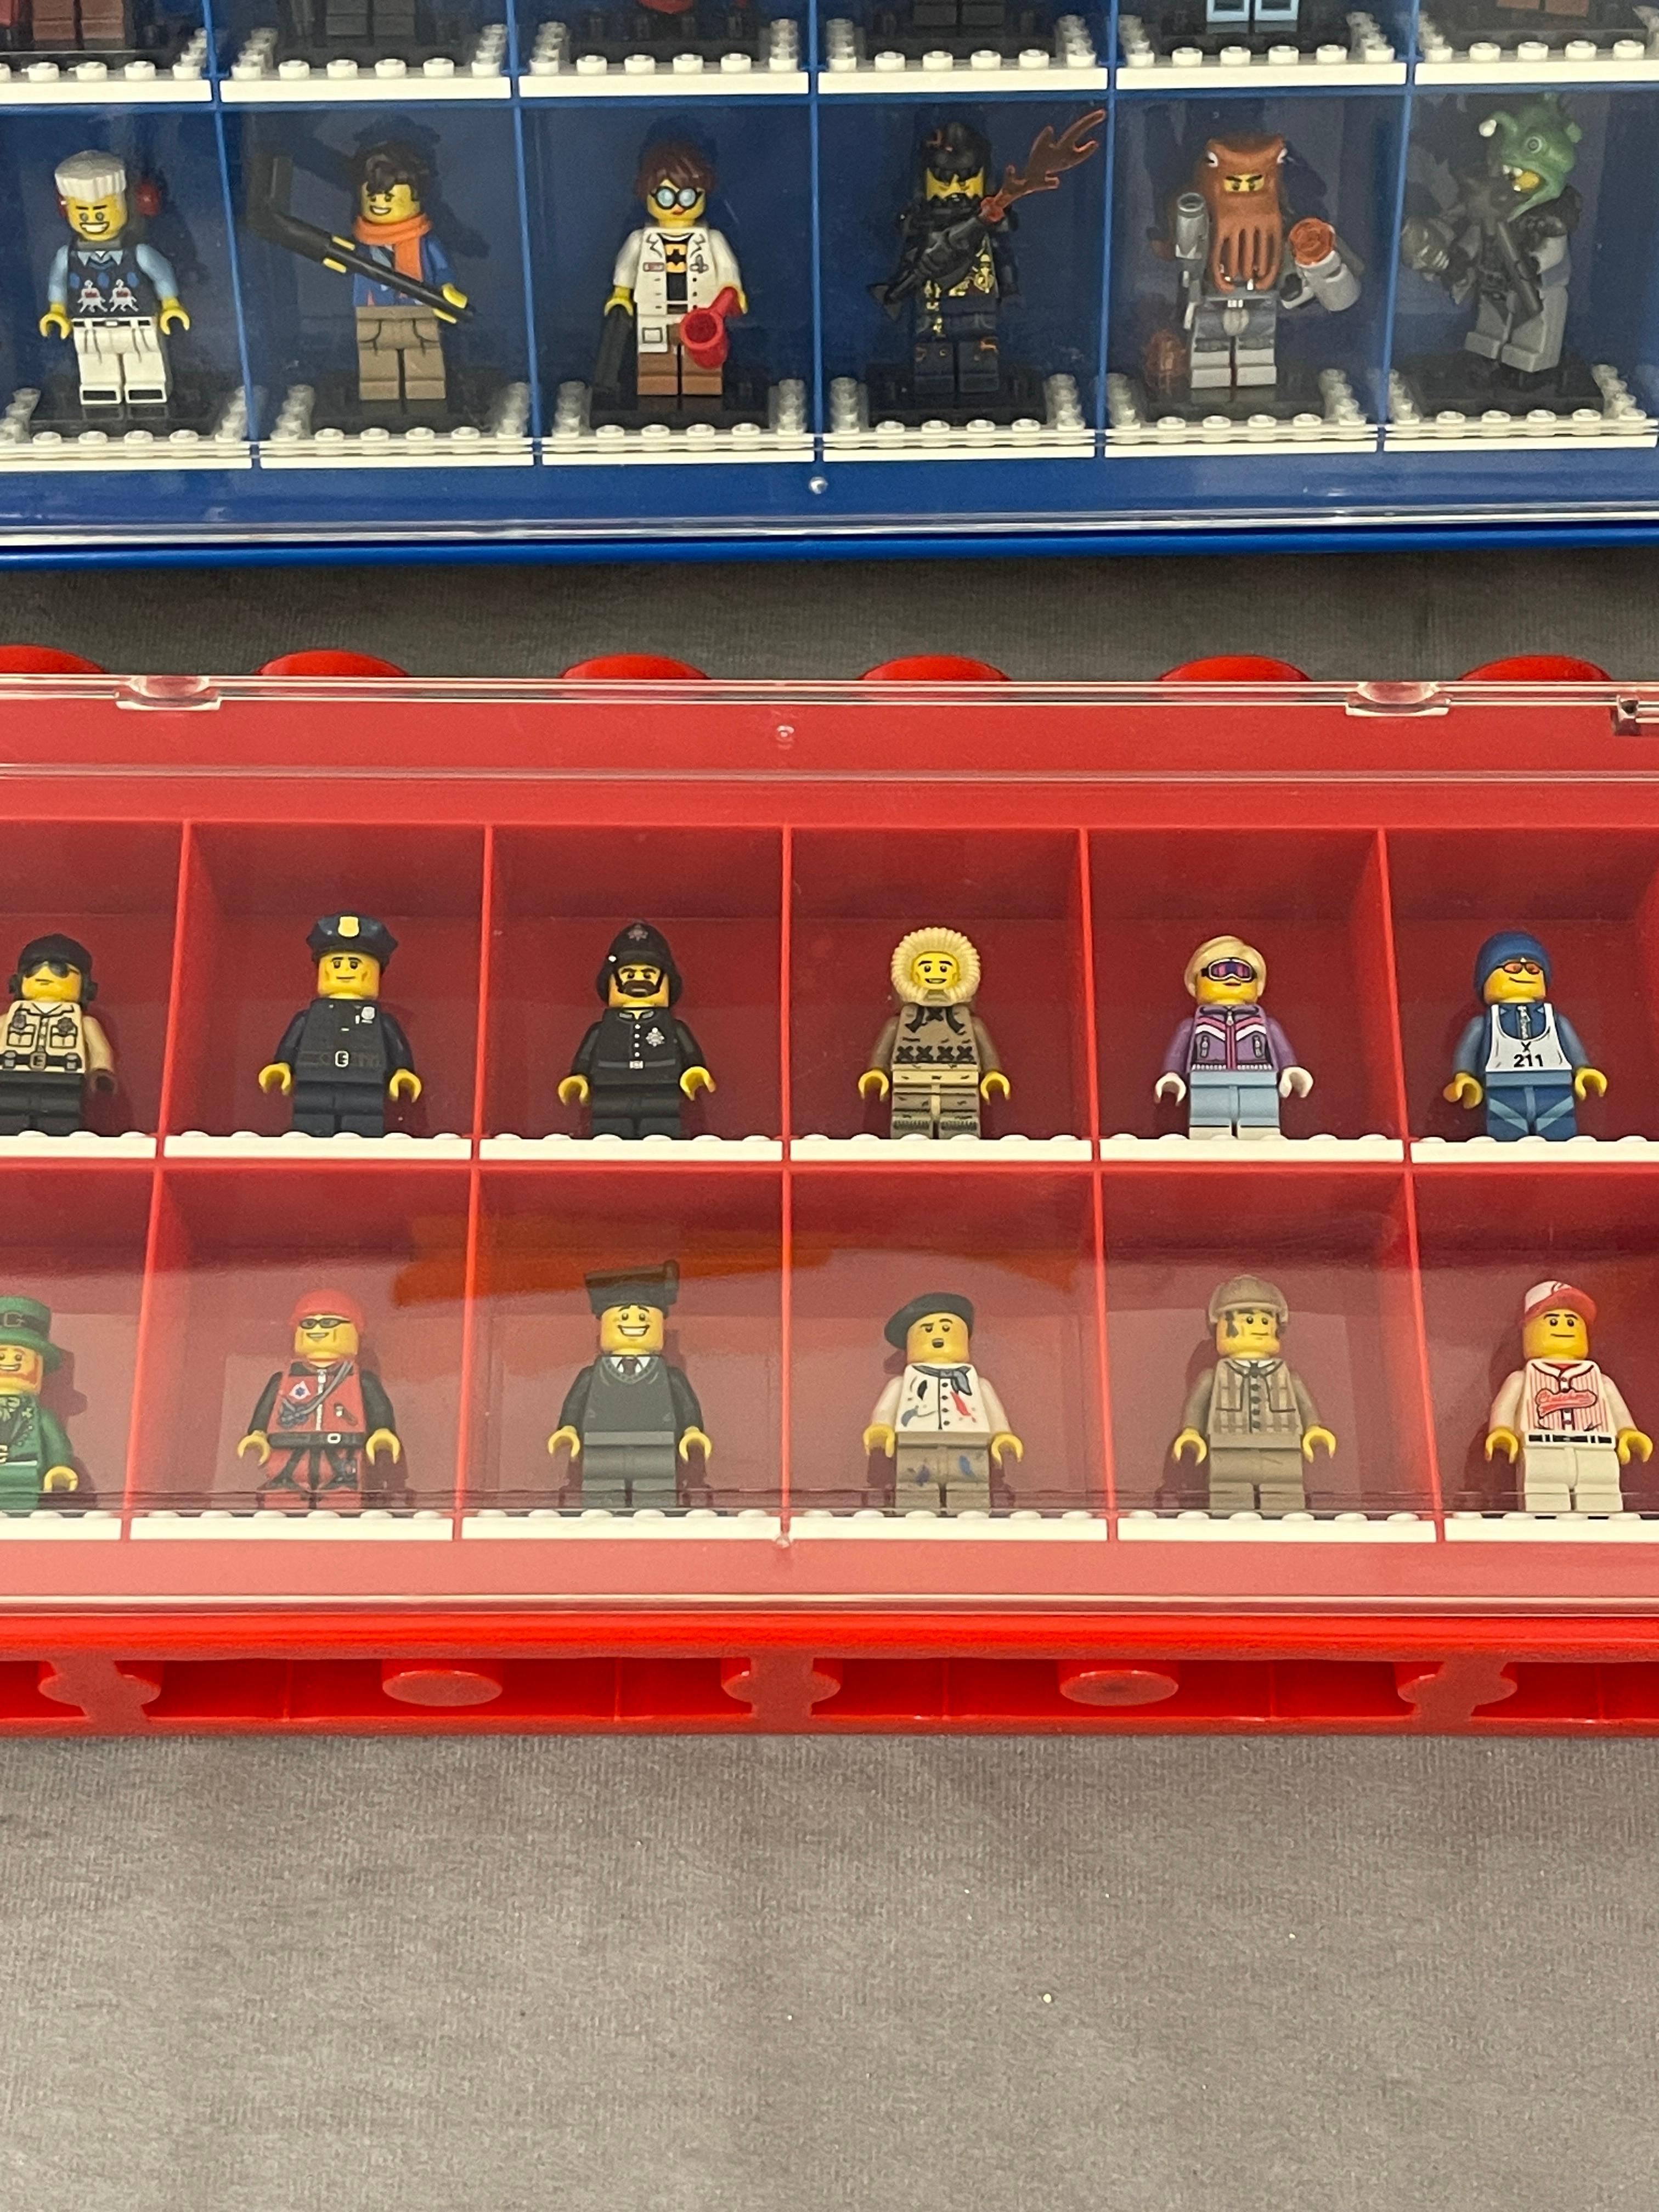 LEGO Minifigure Mini Lego People and Display Case Collection Lot